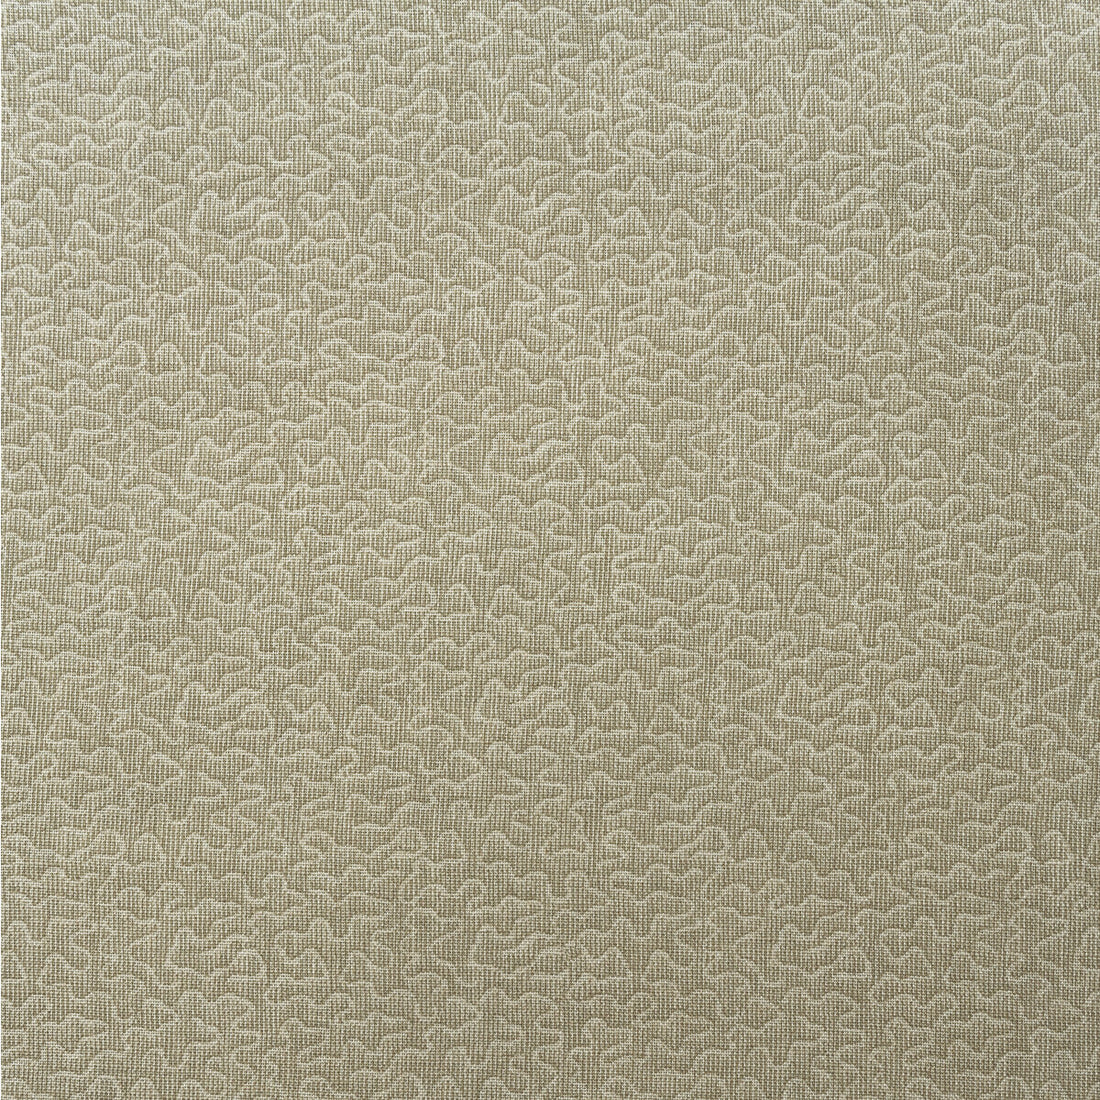 Pollen fabric in stone color - pattern AM100383.106.0 - by Kravet Couture in the Andrew Martin Garden Path collection